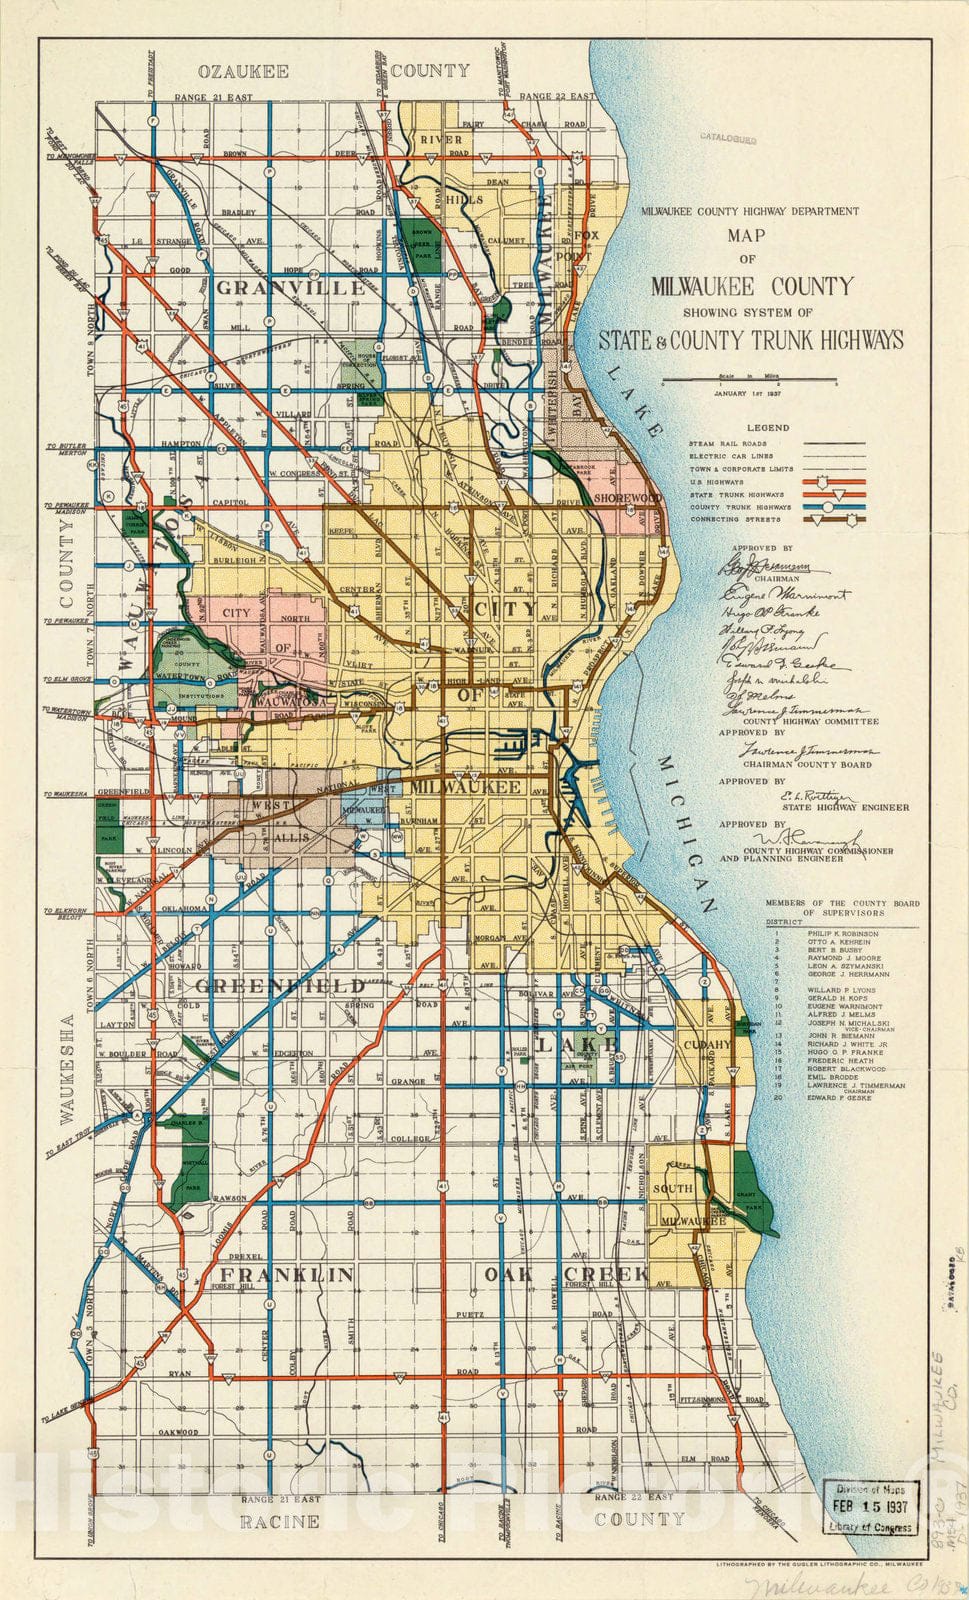 Map : Milwaukee County, Wisconsin 1937, Map of Milwaukee County showing system of state & county trunk highways , Antique Vintage Reproduction